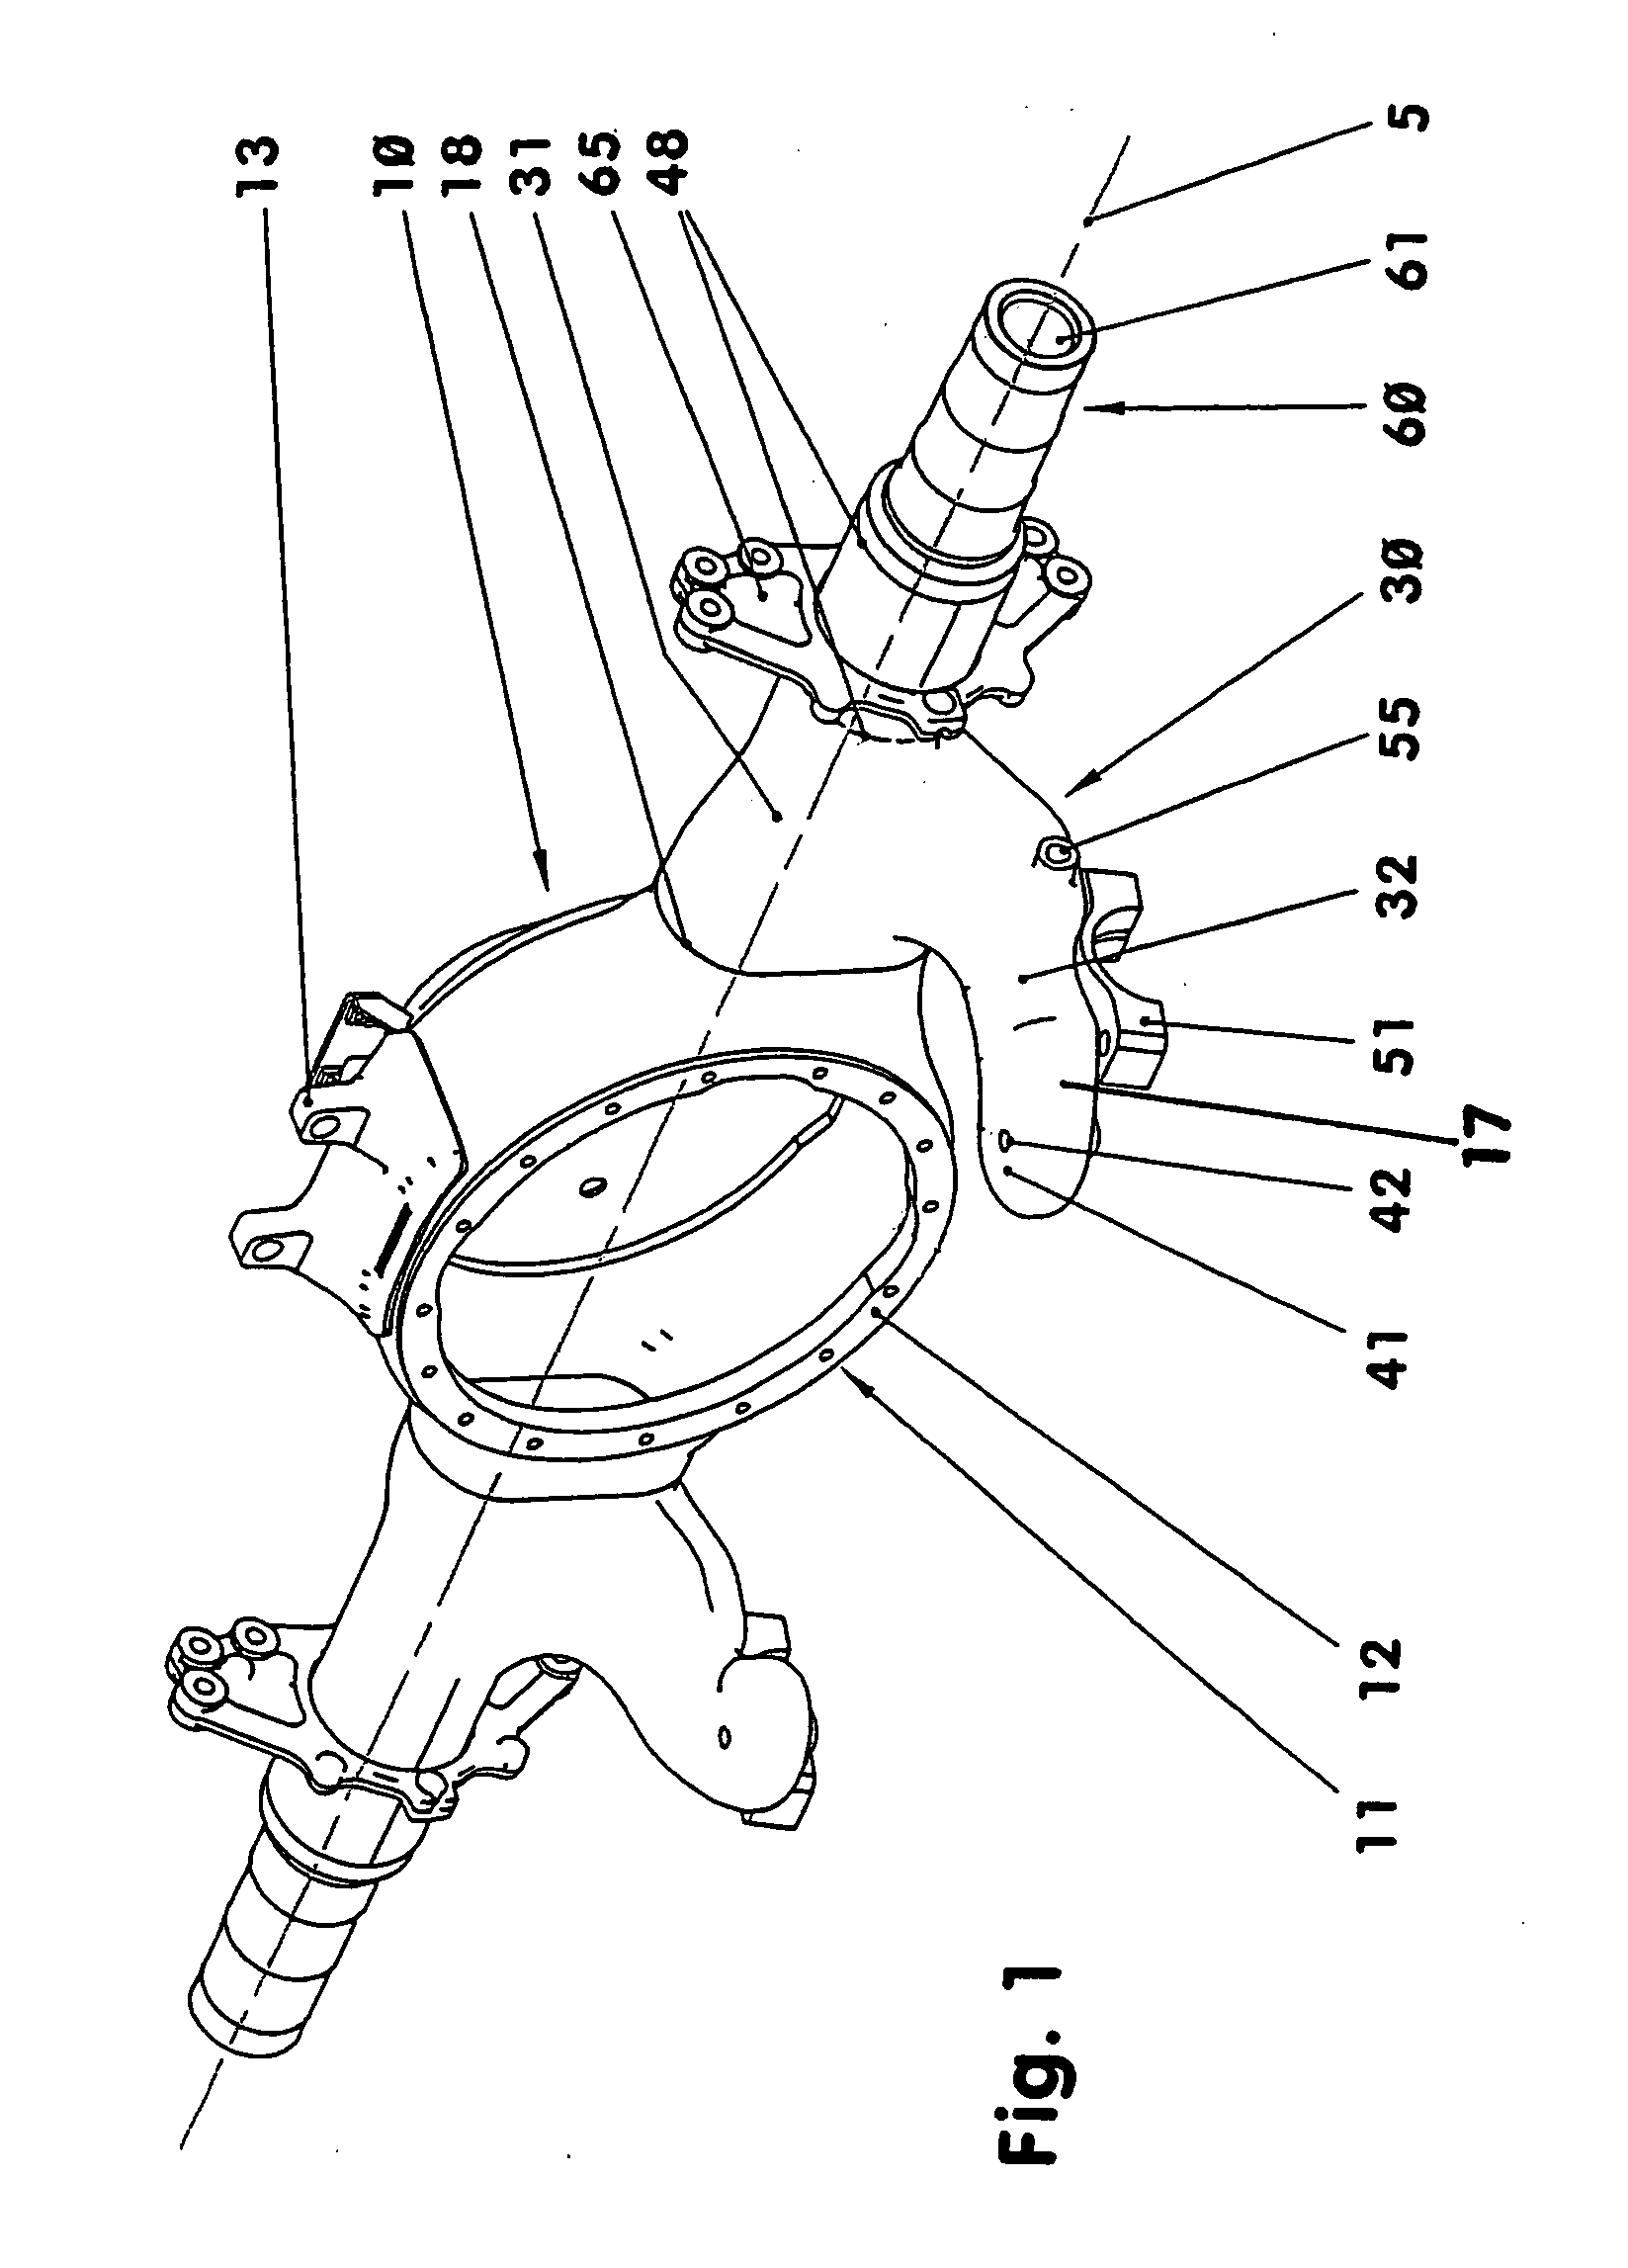 Rigid axle with integrated spring brackets for use on a vehicle